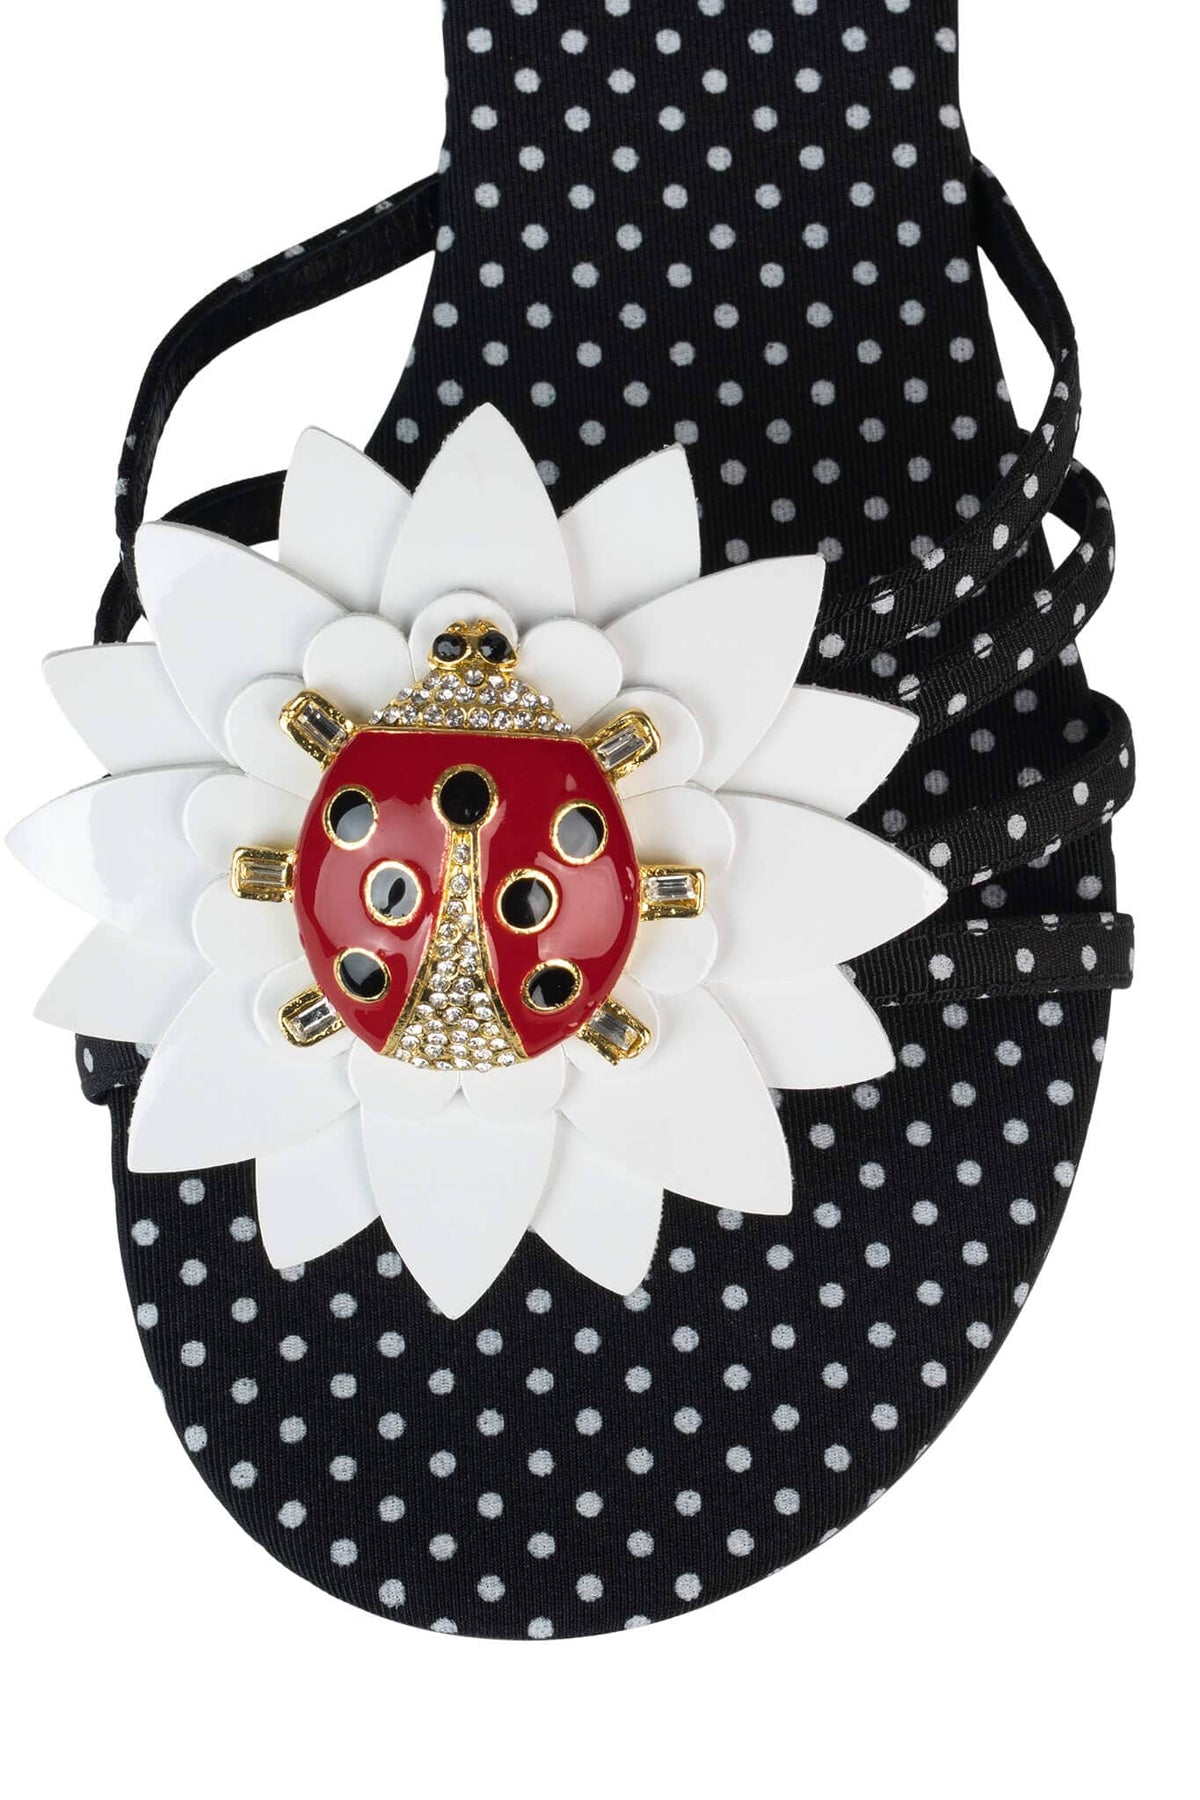 BUG-ME Jeffrey Campbell Sandals Black White Red Combo